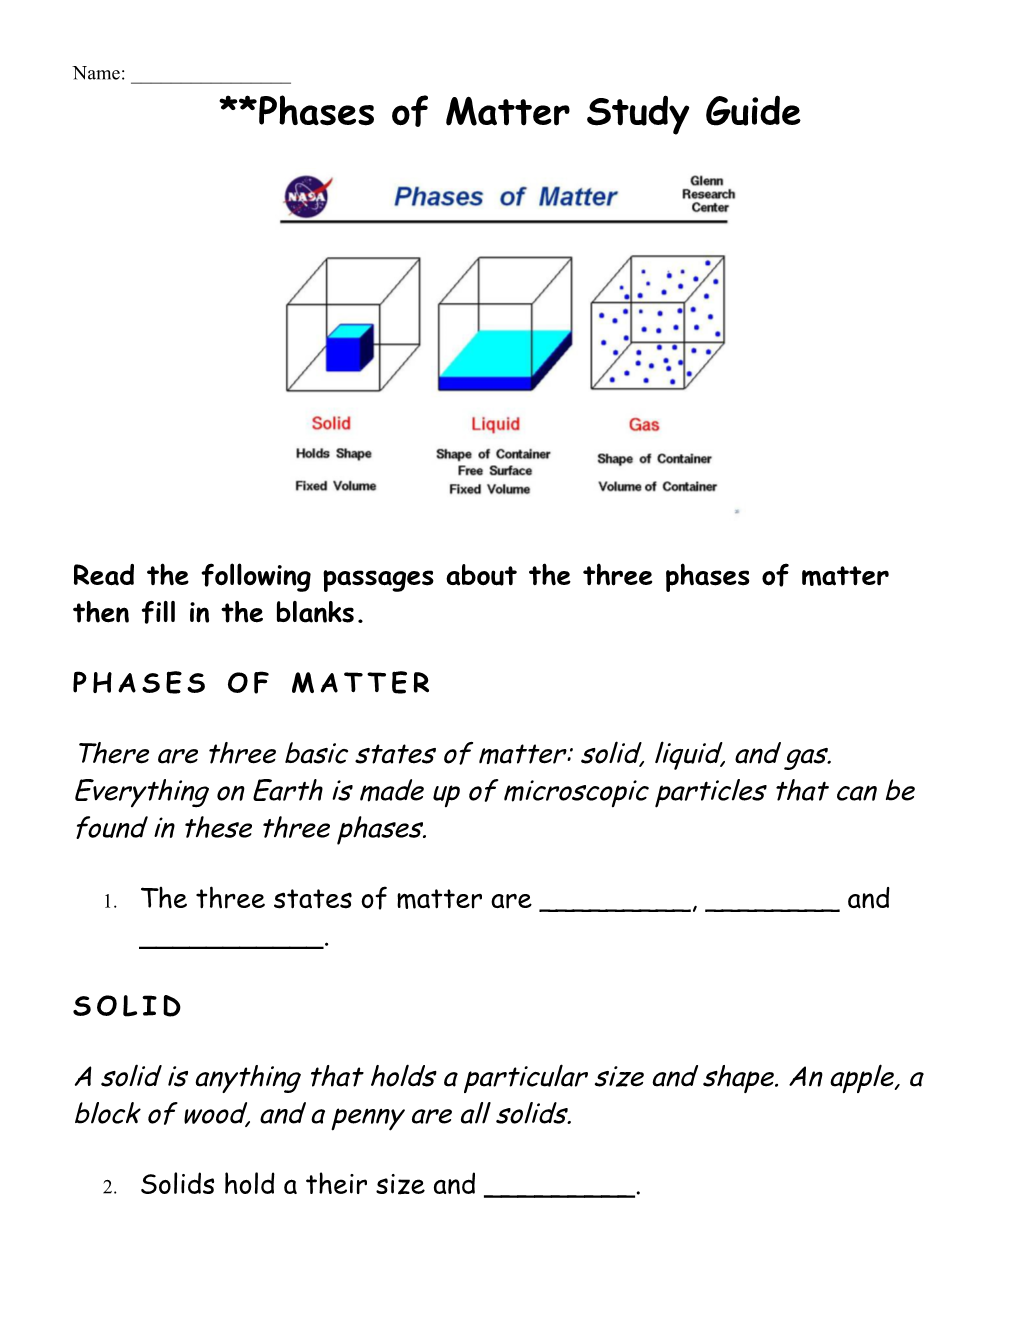 Phases of Matter Study Guide